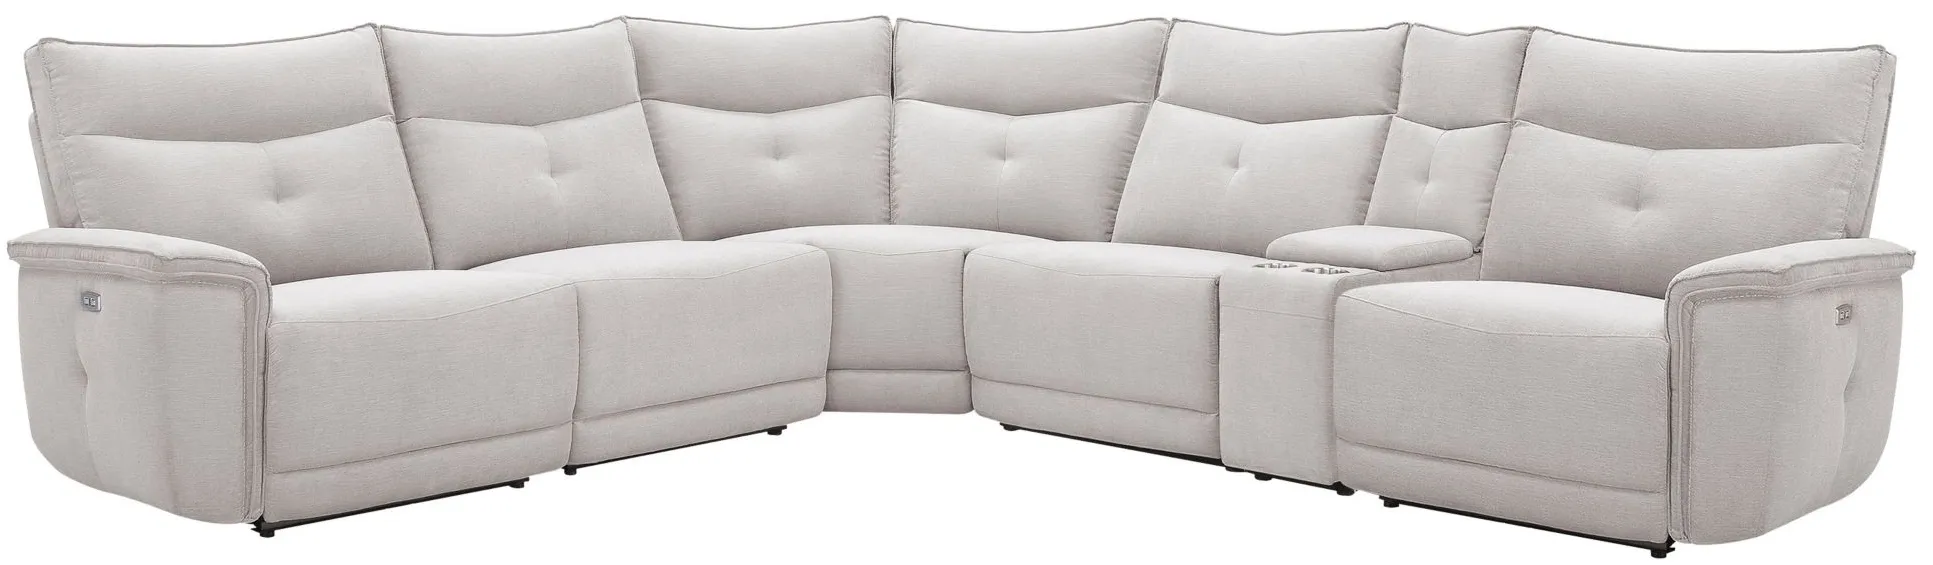 Graceland 6-pc. Sectional Sofa w/Power Headrests in Mist Gray by Bellanest